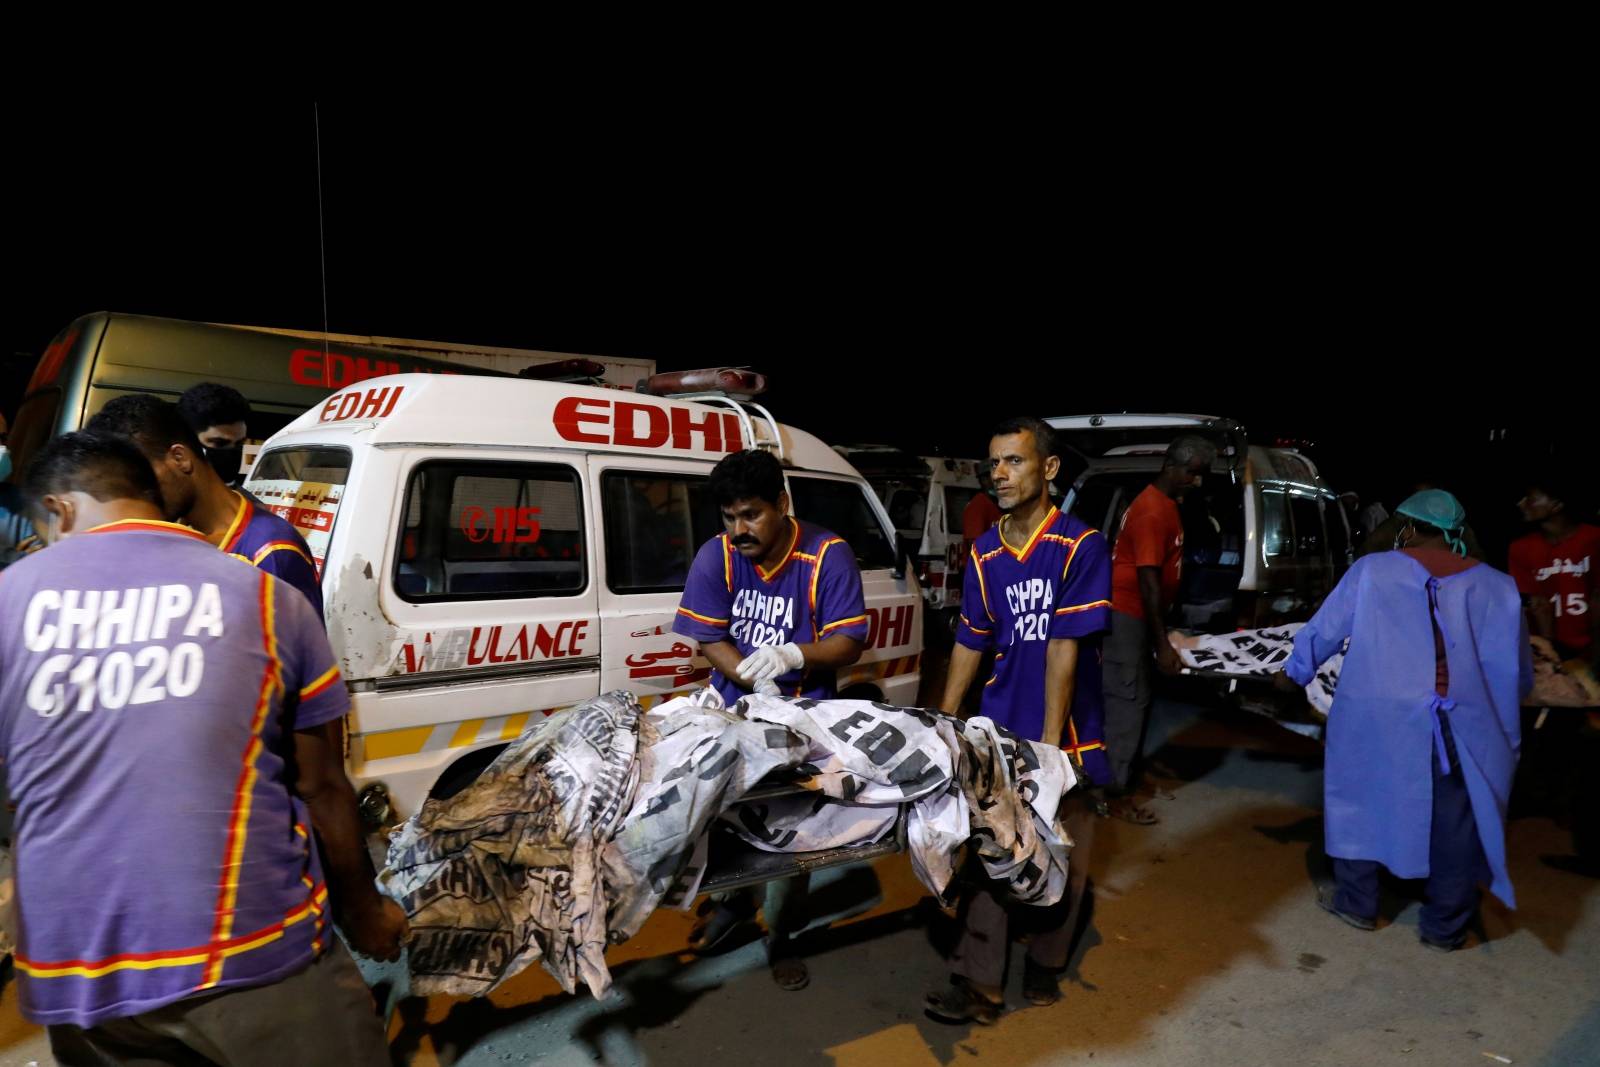 Rescue workers move bodies outside hospital morgue after a passenger plane crashed in a residential area near an airport in Karachi